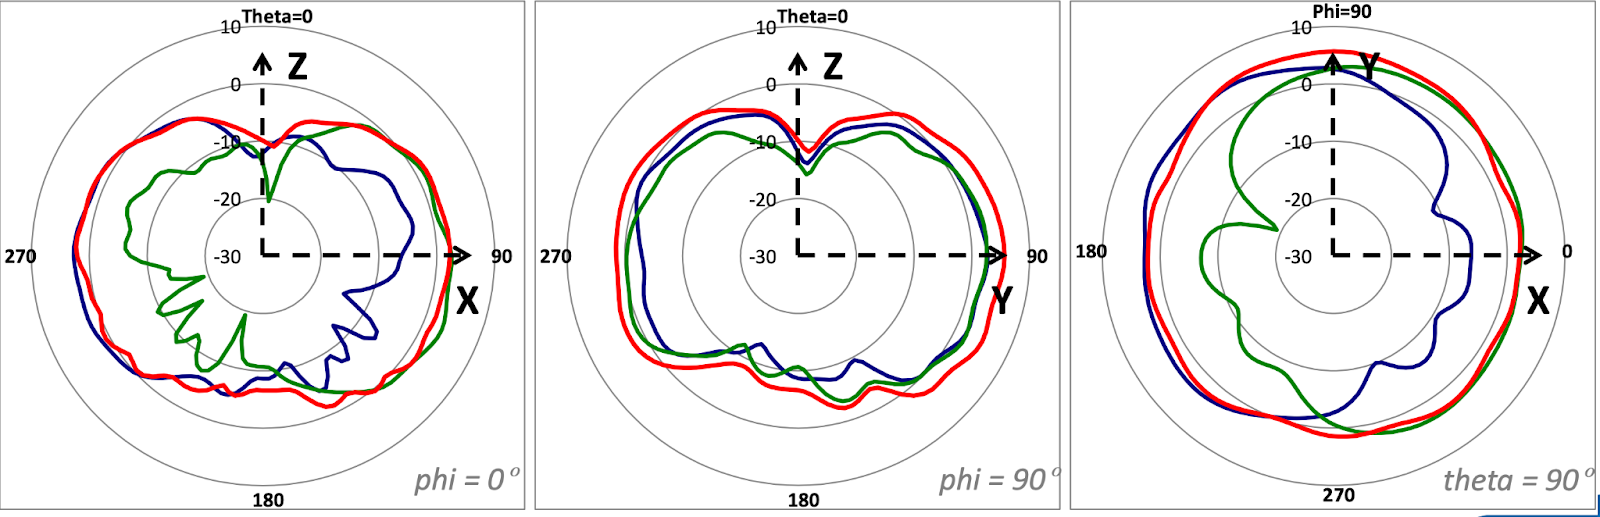 Signal coverage pattern for MR78 on 5GHz Wireless (with Phi and Theta values)